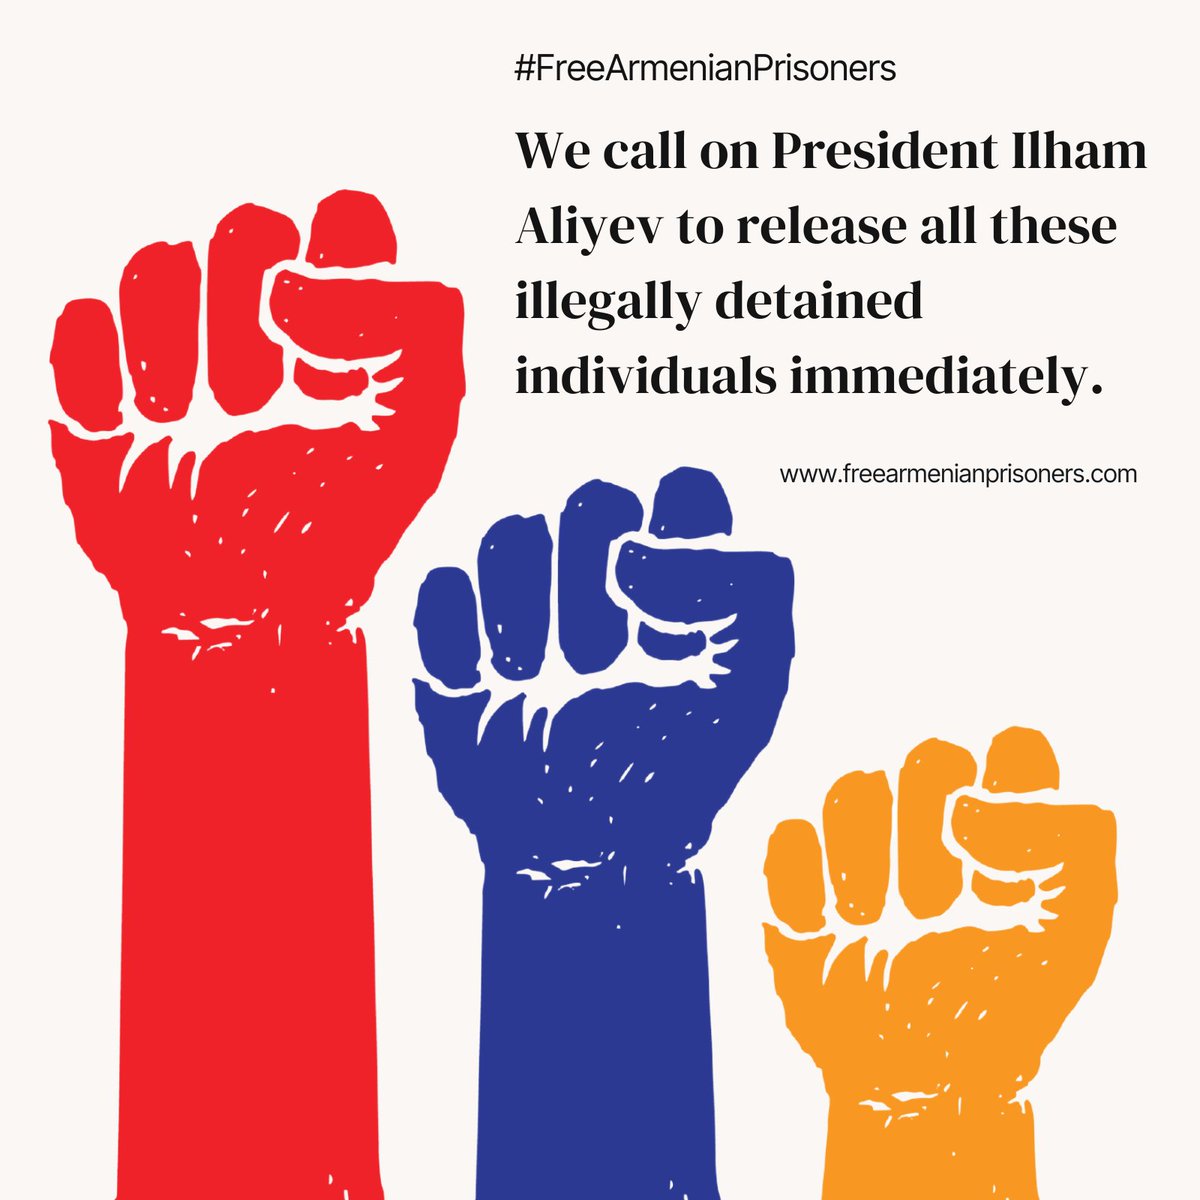 Over 150 global leaders today are demanding the immediate and unconditional release of Armenians being imprisoned in Baku, including @RubenVardanyan_. Read their letter to President @presidentaz freearmenianprisoners.com #FreeArmenianPrisoners